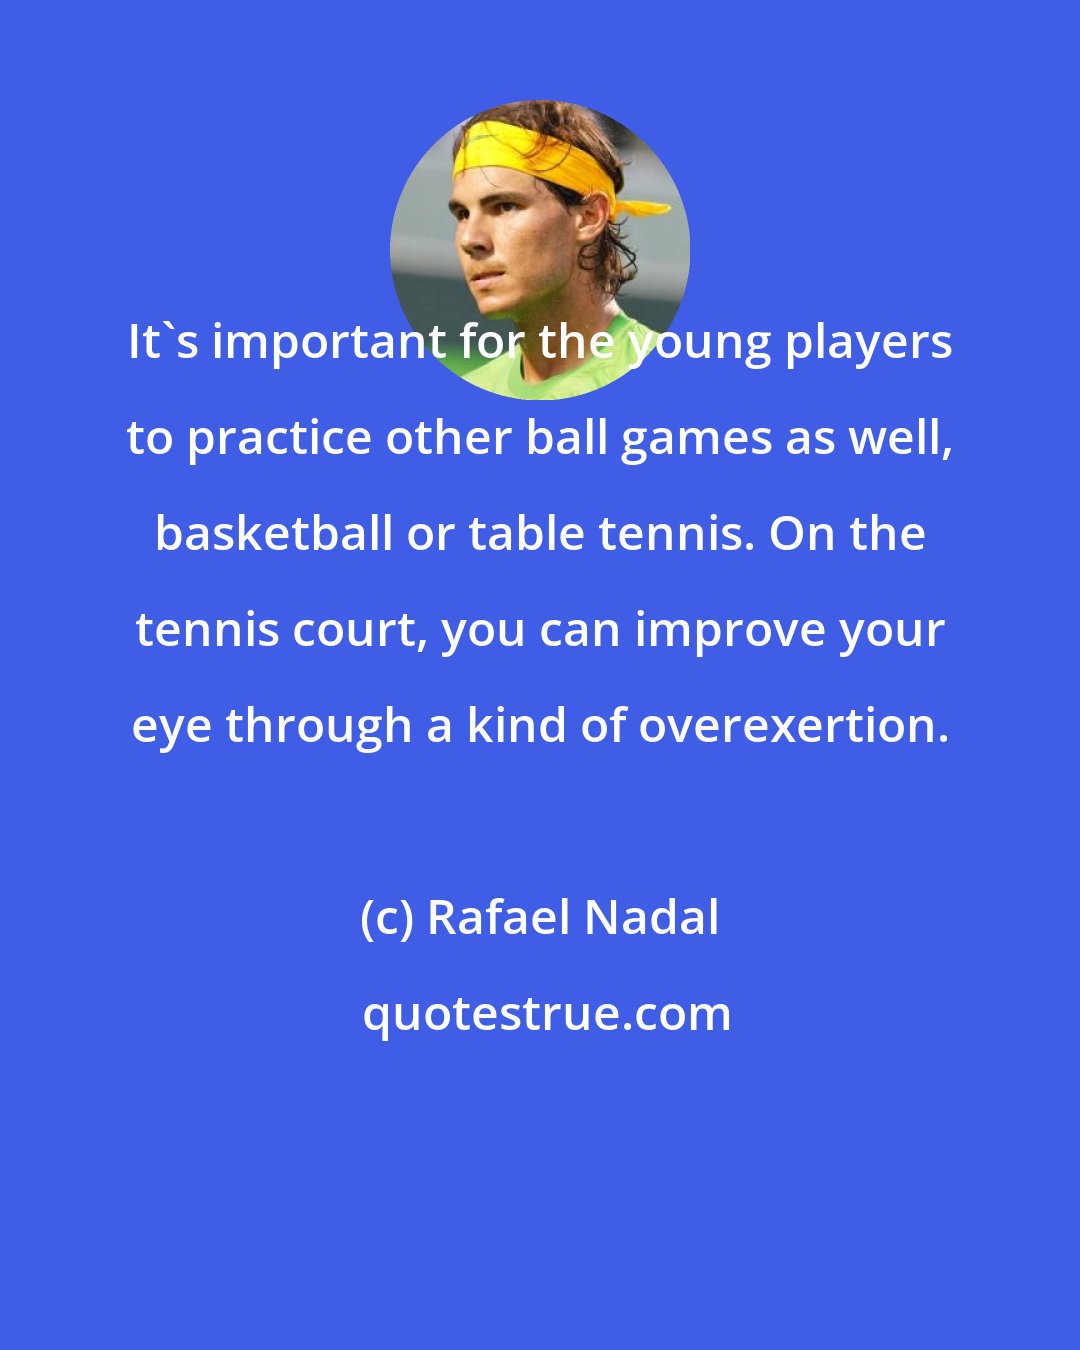 Rafael Nadal: It's important for the young players to practice other ball games as well, basketball or table tennis. On the tennis court, you can improve your eye through a kind of overexertion.